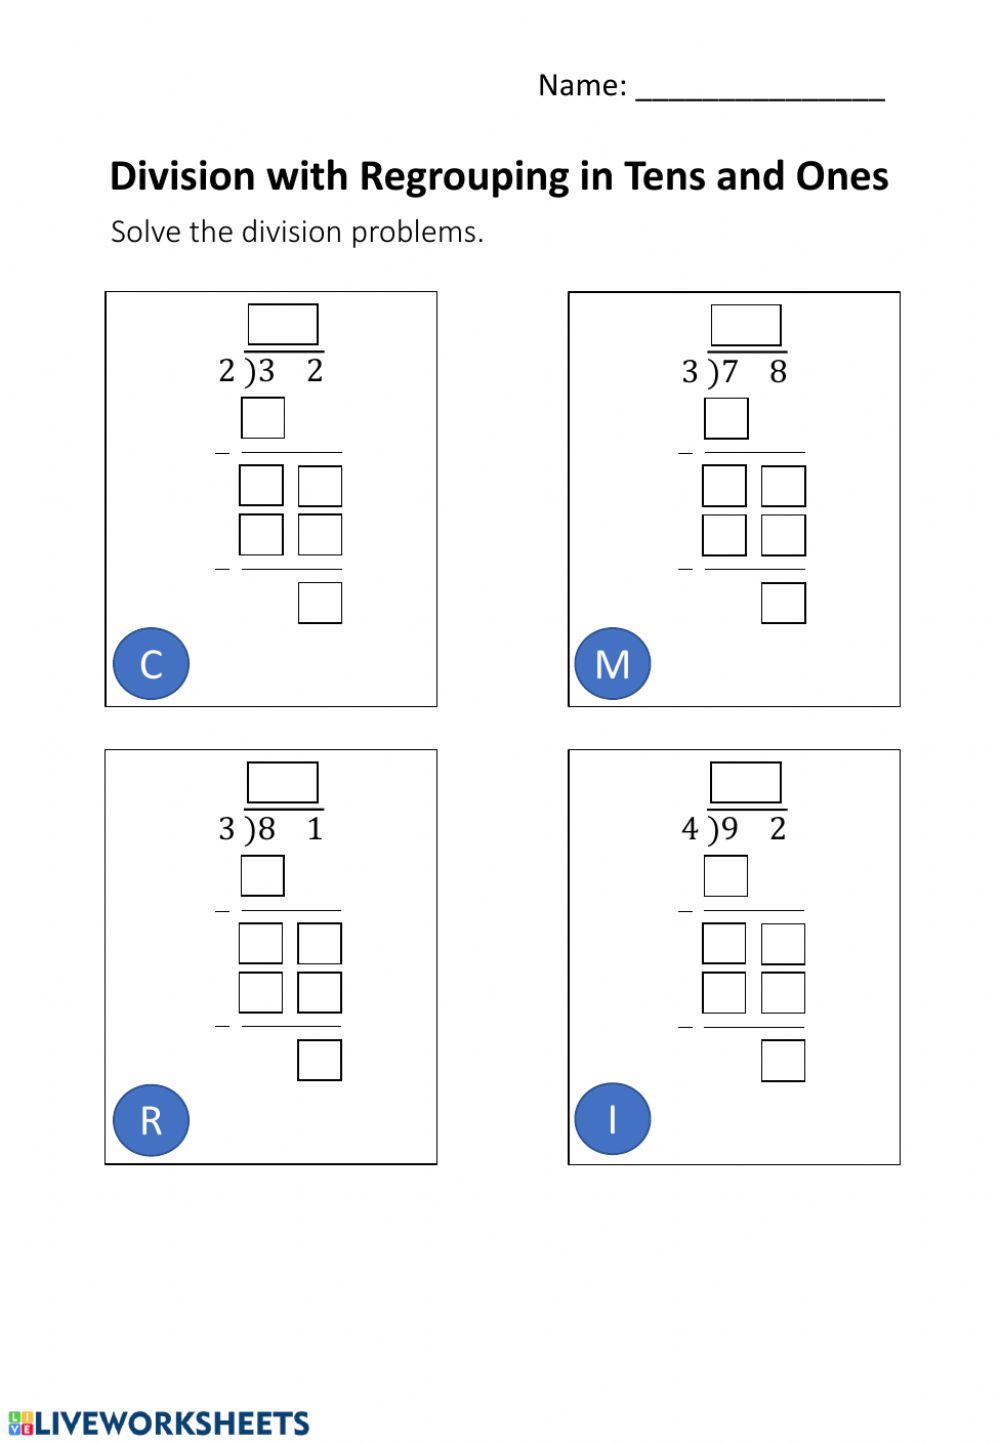 Division With Regrouping Worksheet